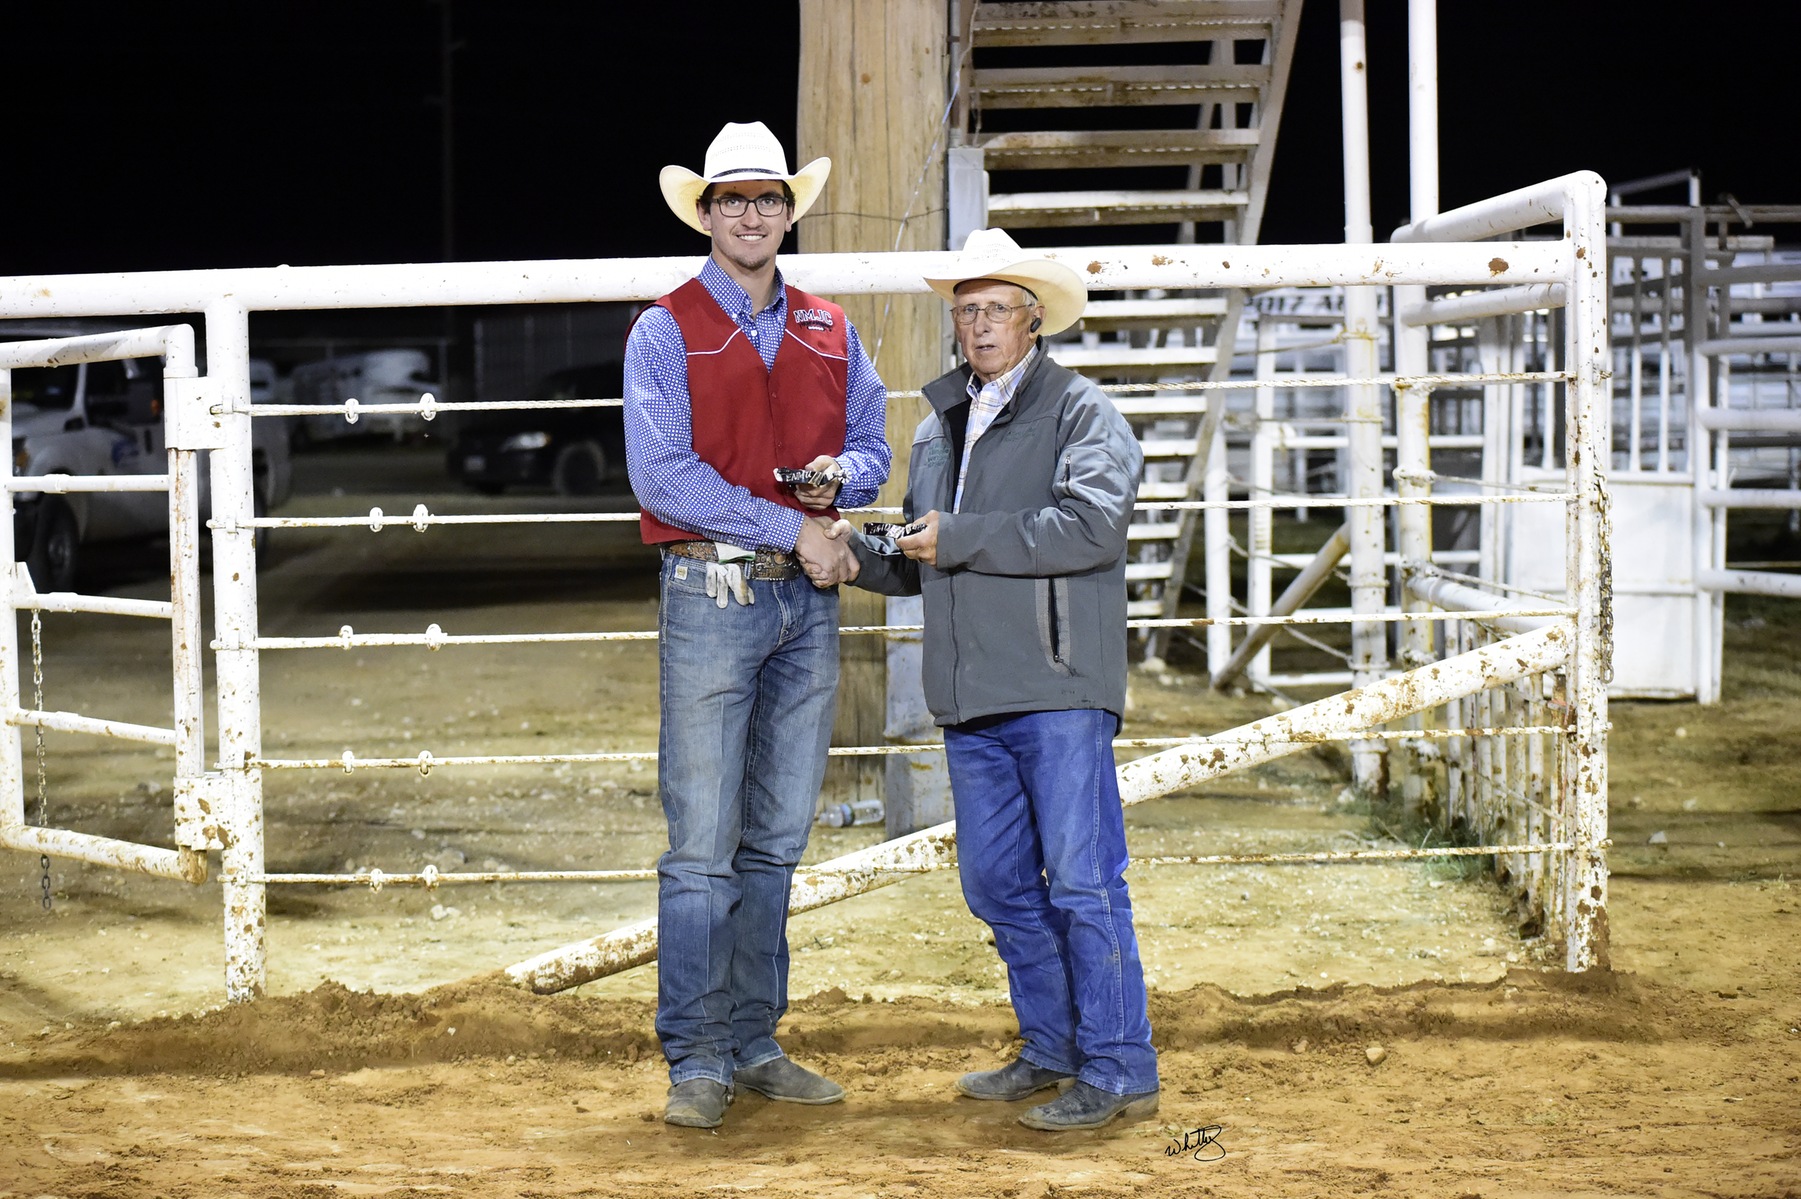 NMJC’s Tee McLeod Wins the Men’s All Around Champion ENMU Rodeo